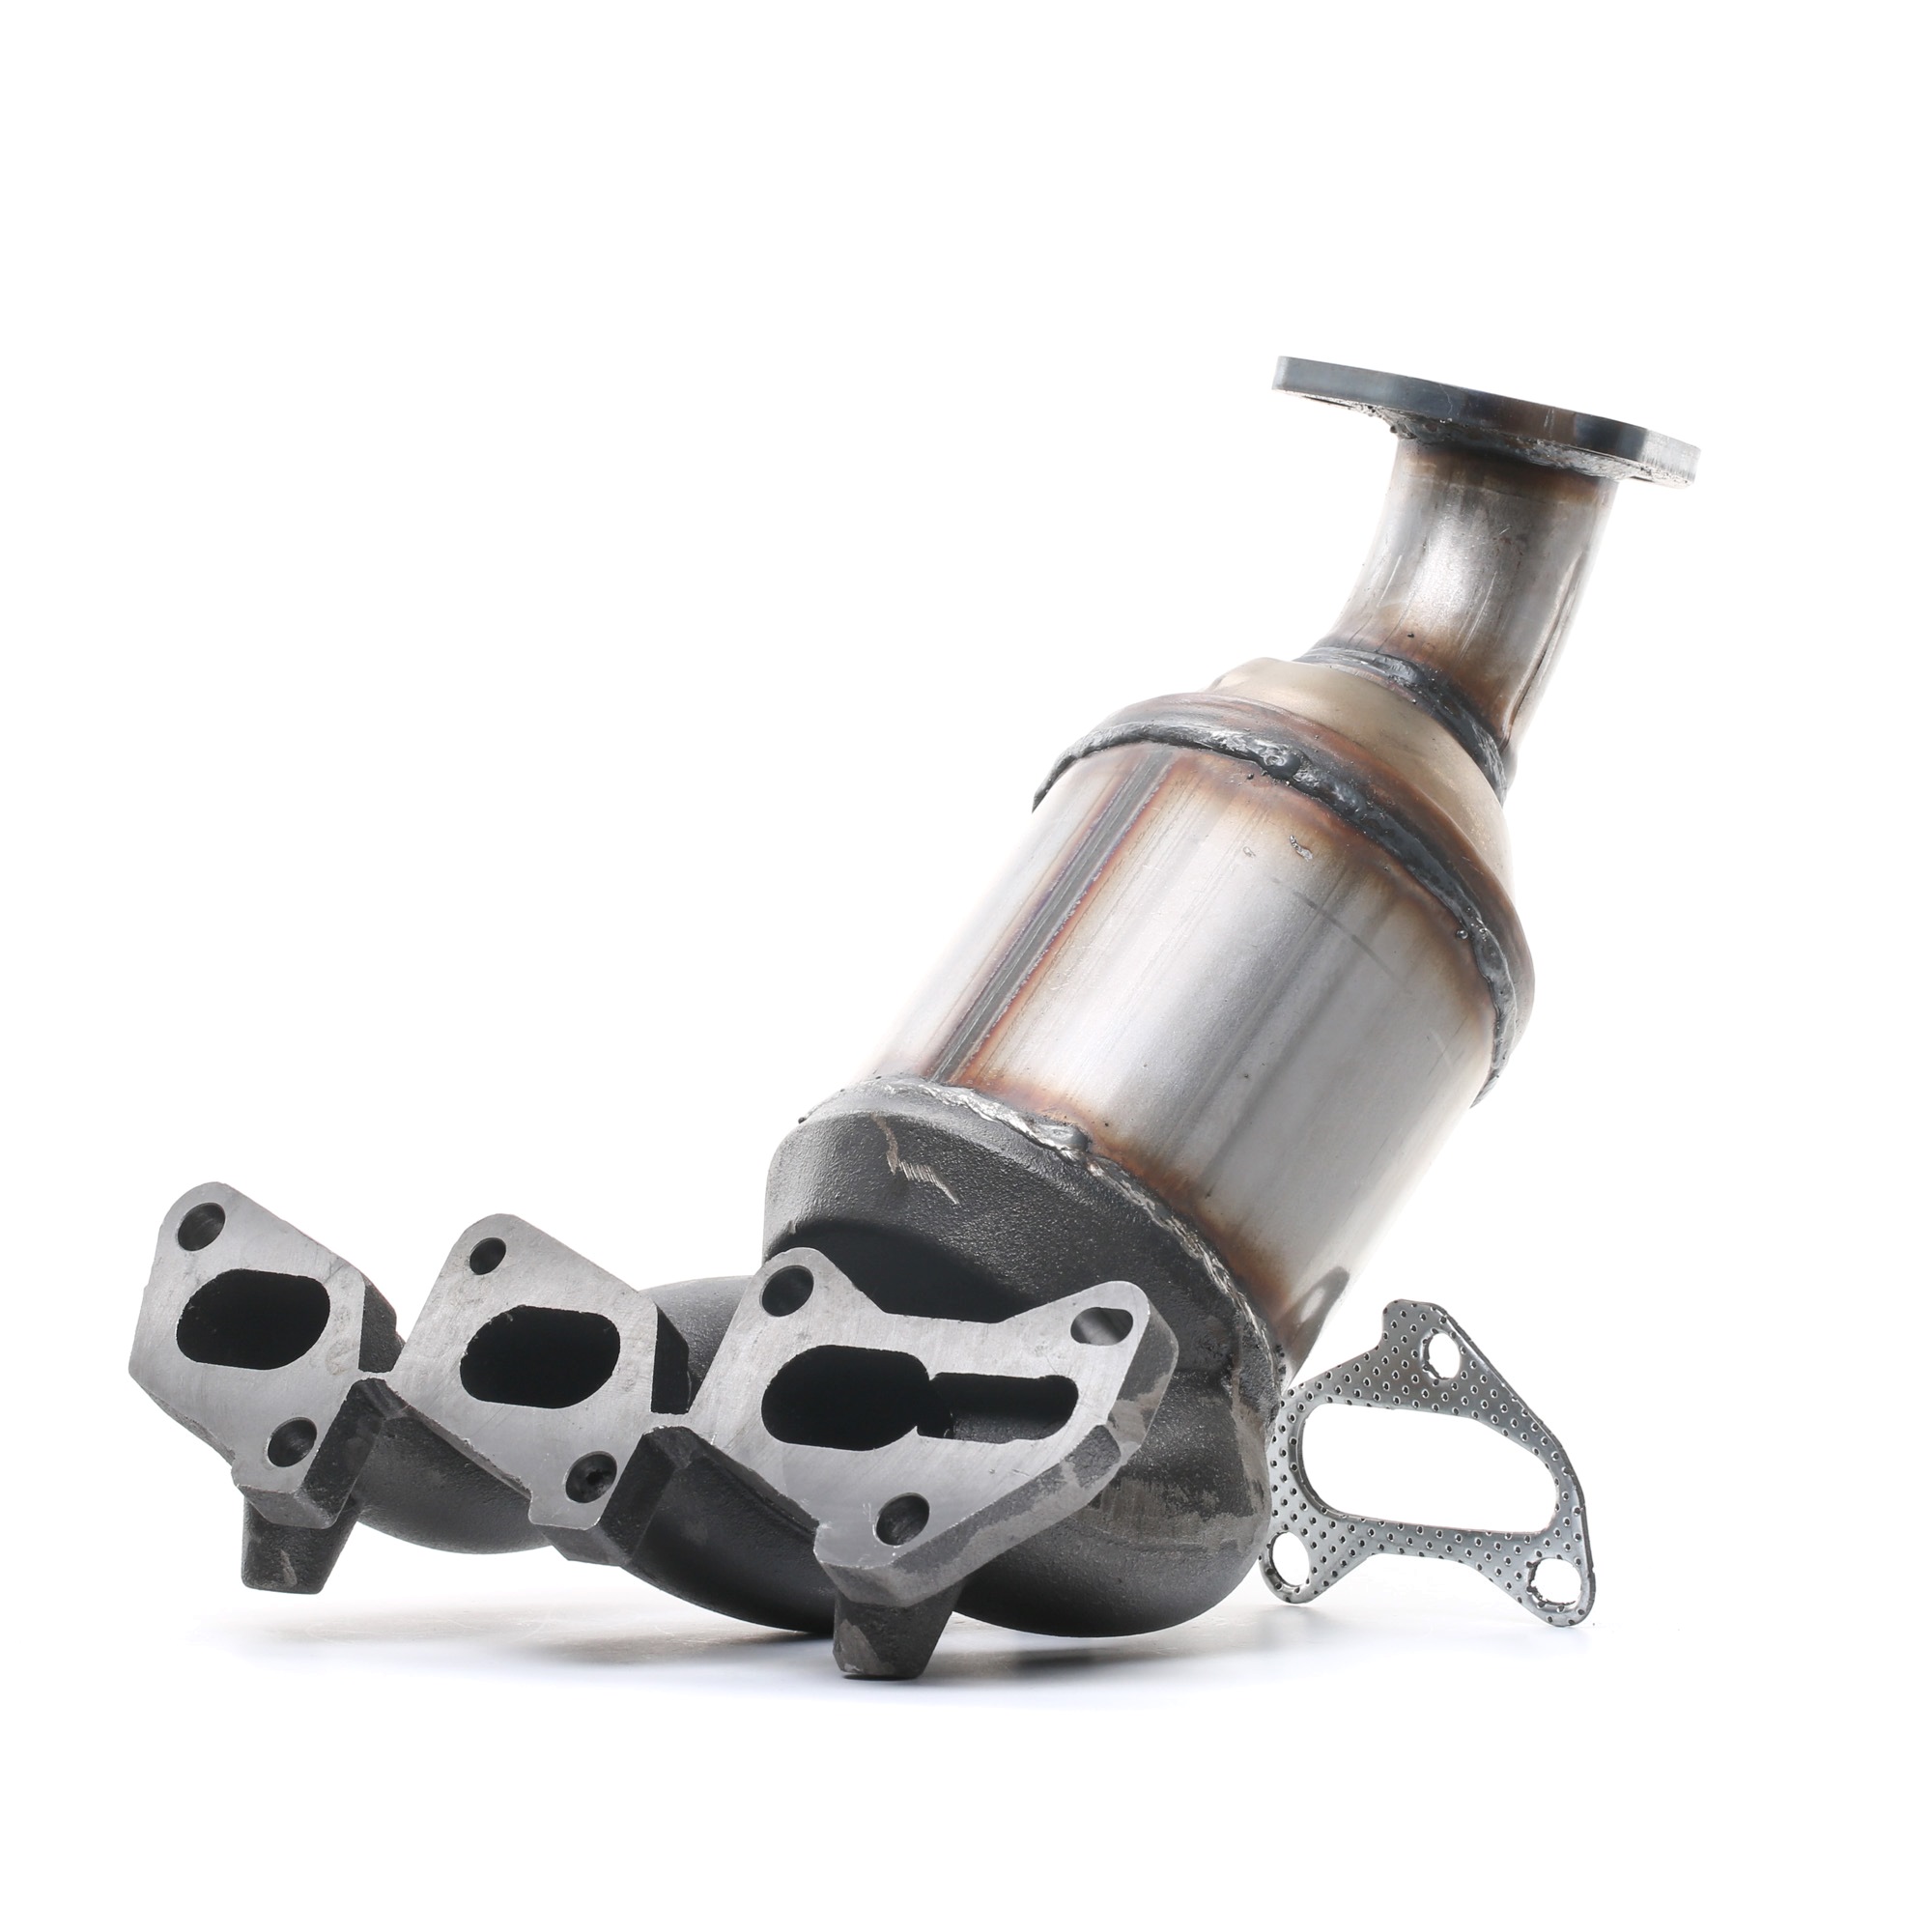 RIDEX 429C0198 Catalytic converter Euro 4 (D4), with mounting parts, with lambda sensor connection, with exhaust manifold gasket(s), Front, Length: 380 mm